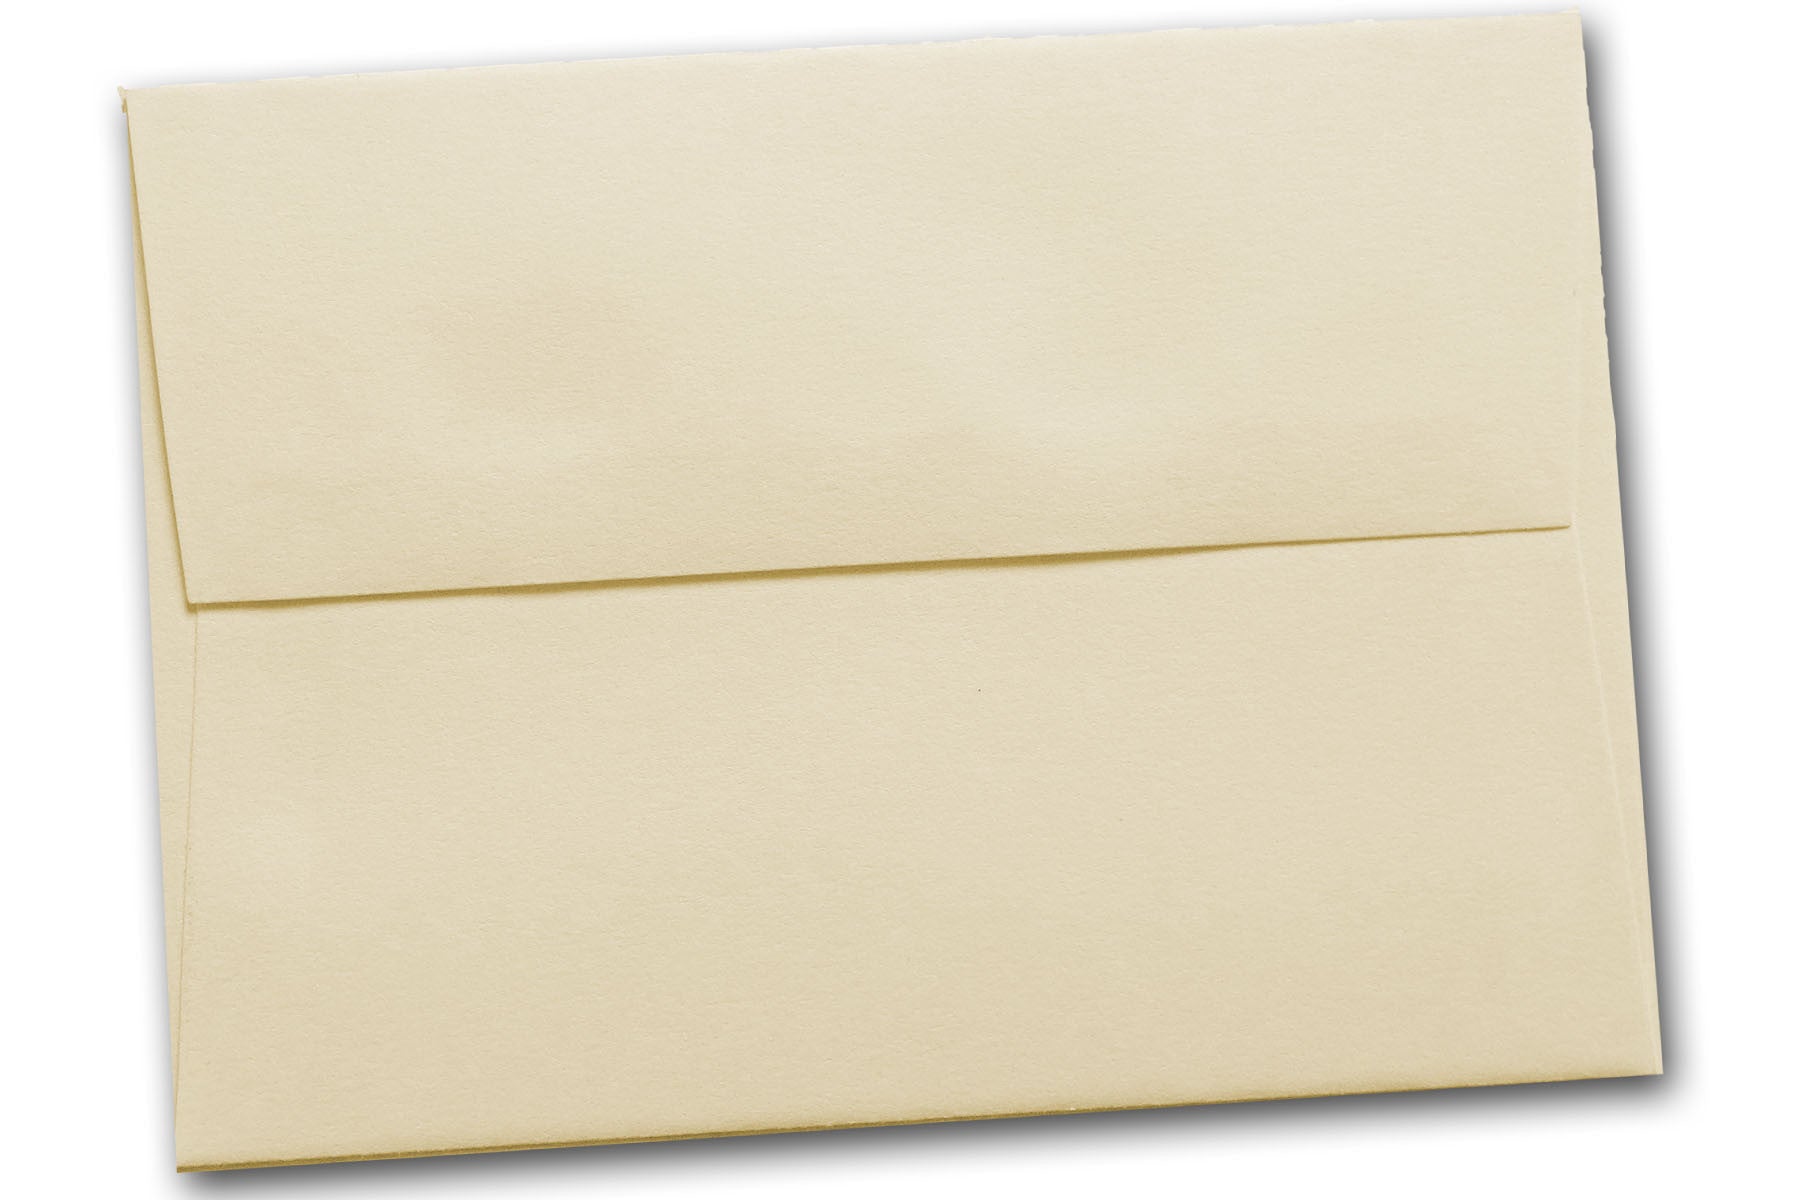  110 5x7 Red Invitation Envelopes - for 5x7 Cards - A7